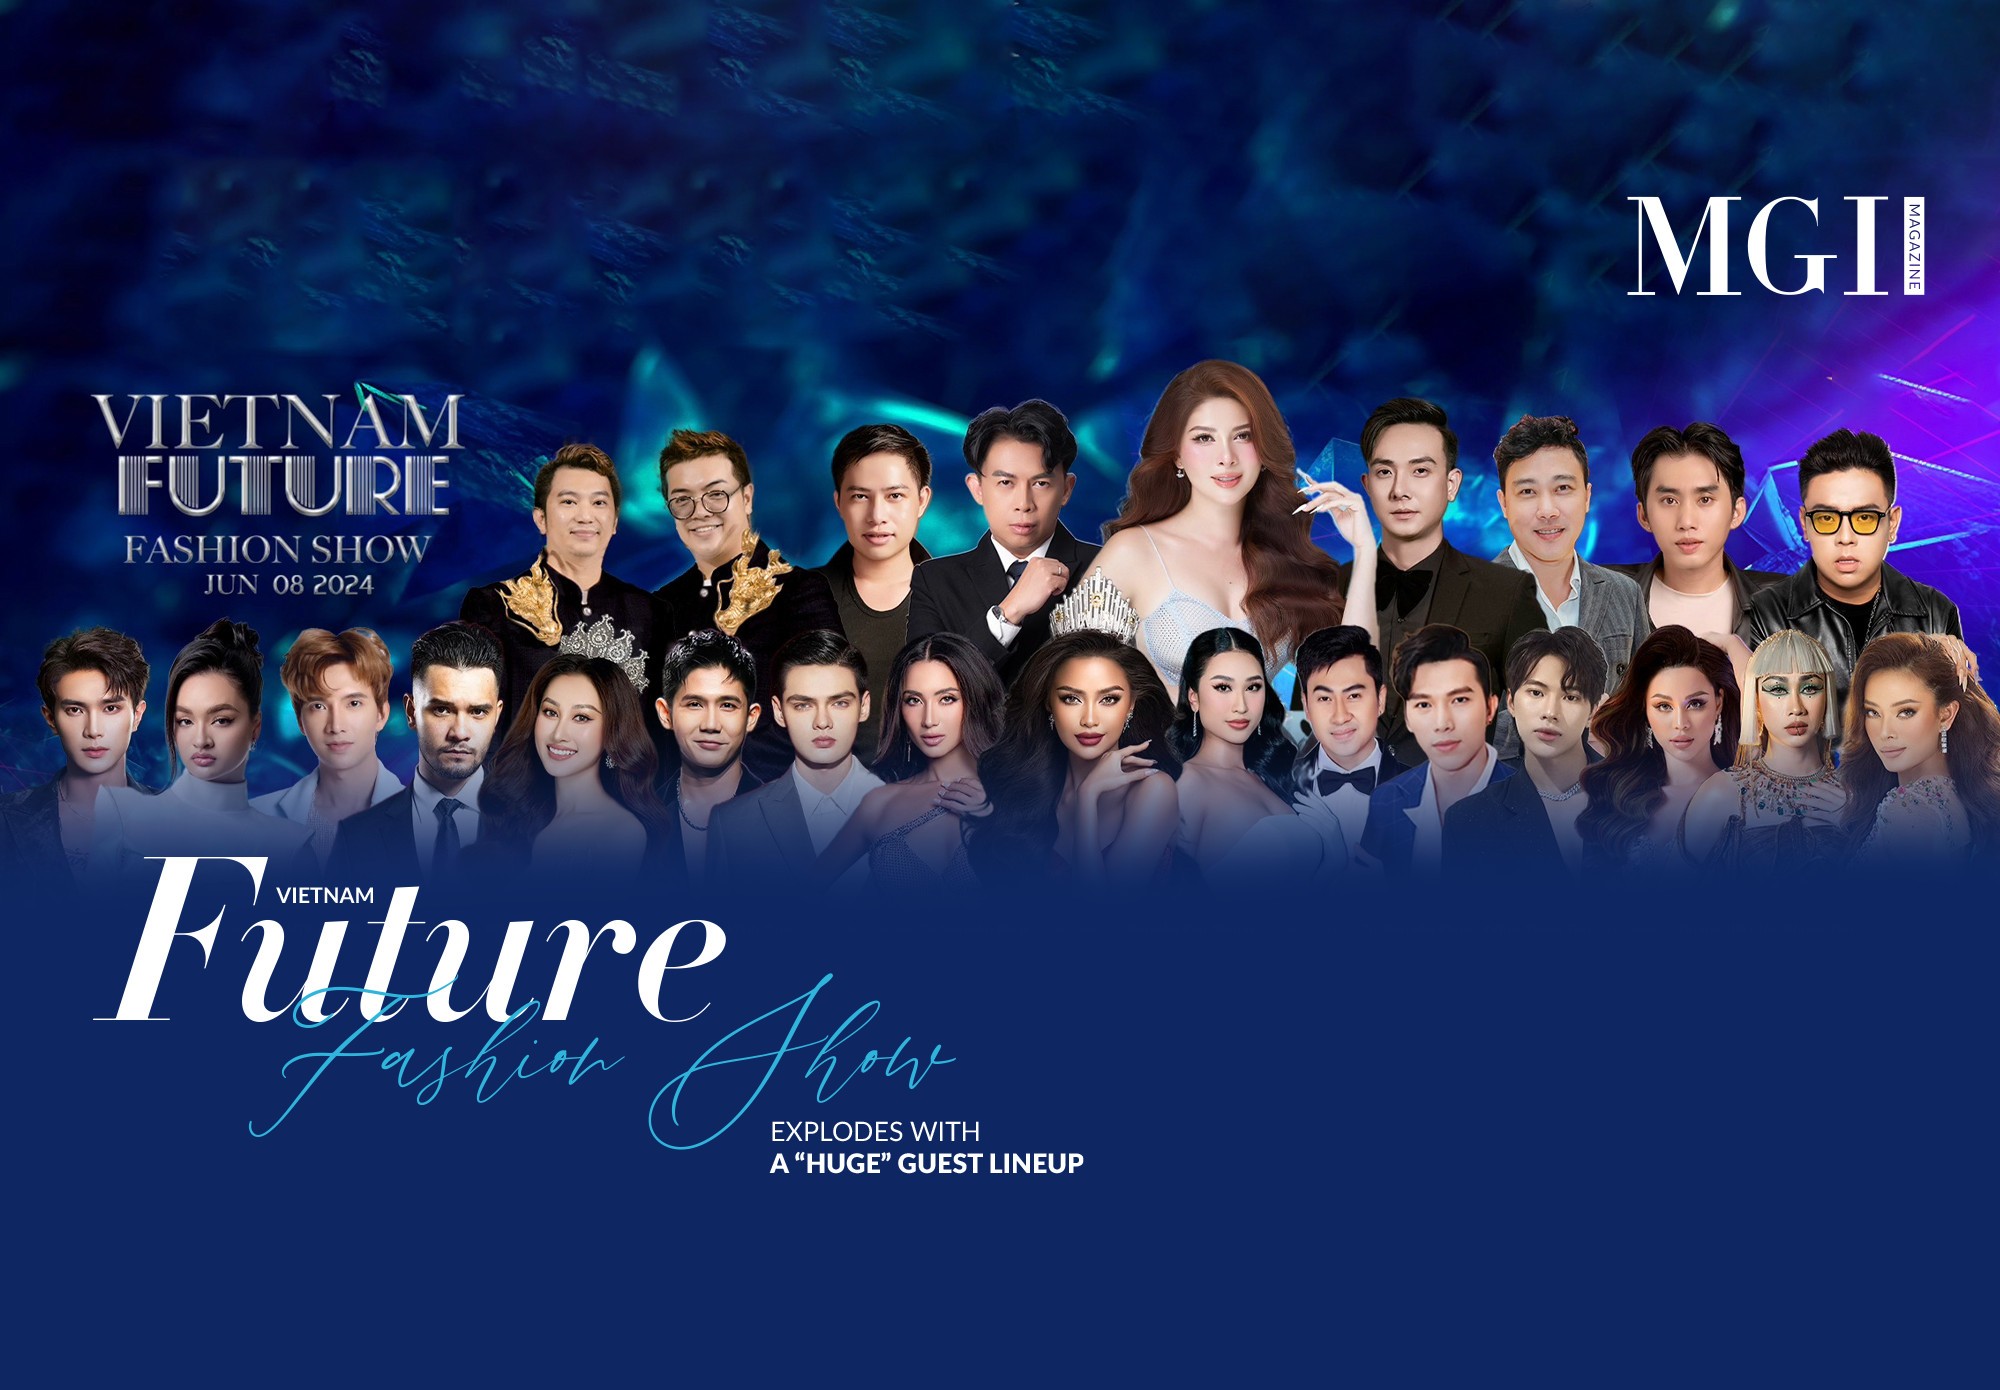 Vietnam Future Fashion Show explodes with a “huge” guest lineup